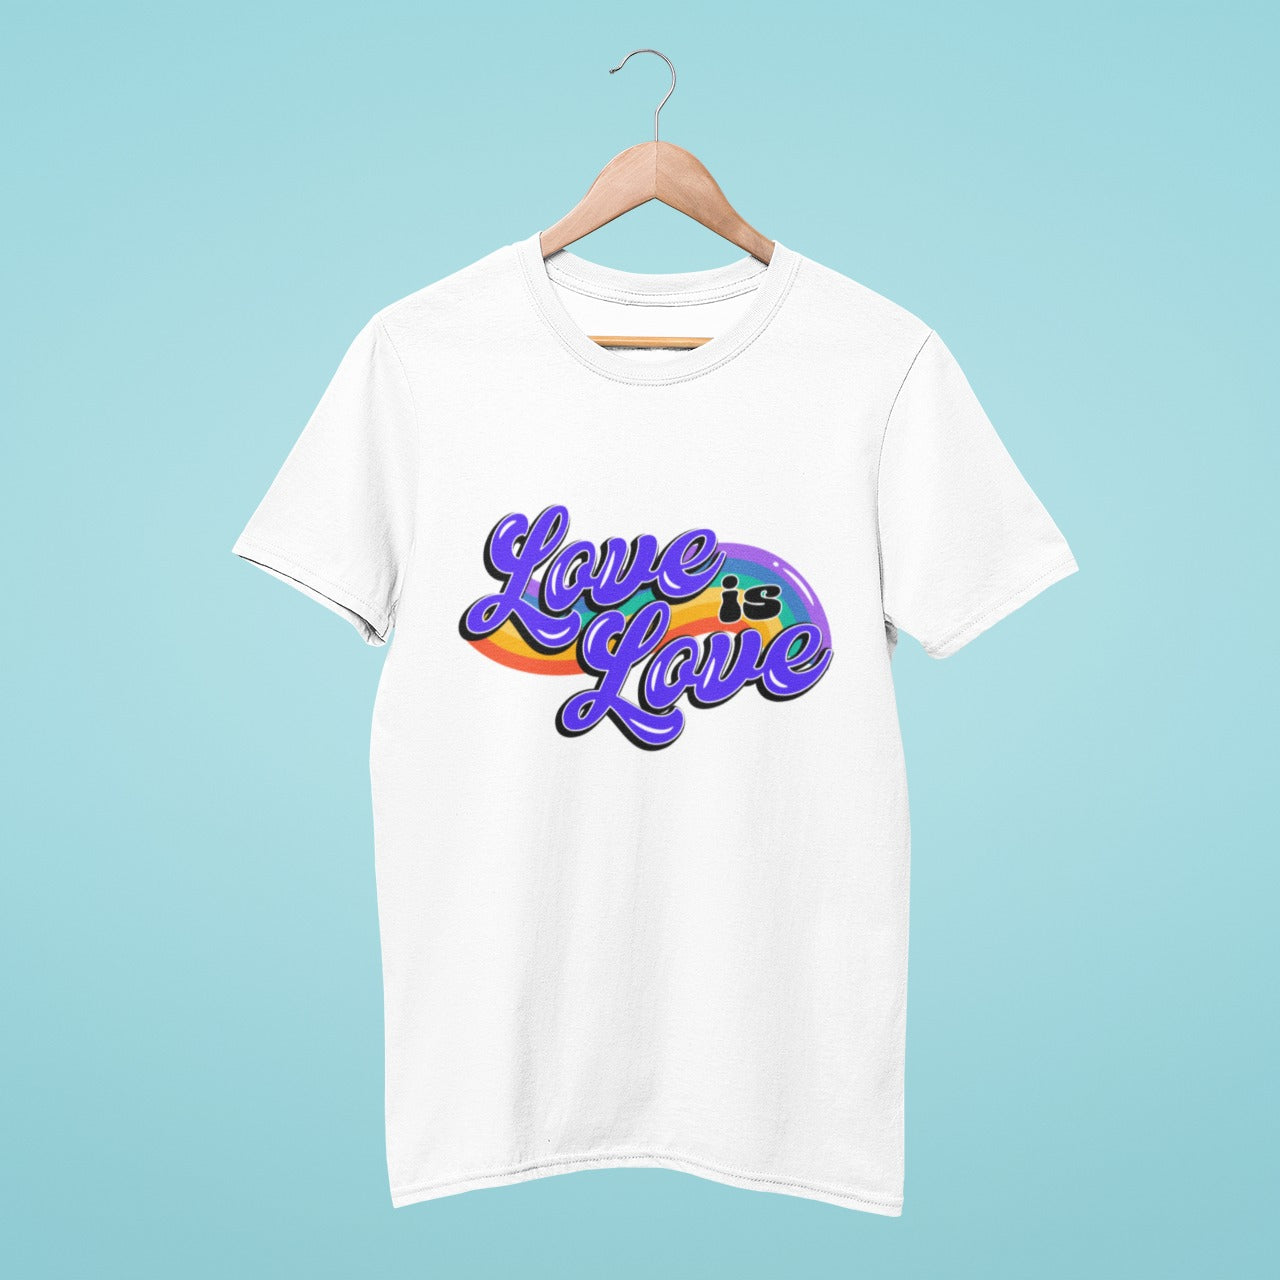 Our white round neck t-shirt features a "Love is Love" design in a cute font with a rainbow swirl background. It's perfect for showing support for the LGBTQ+ community or adding a stylish touch to your wardrobe. Available in various sizes and made with high-quality materials, order now to spread positivity and inclusivity.